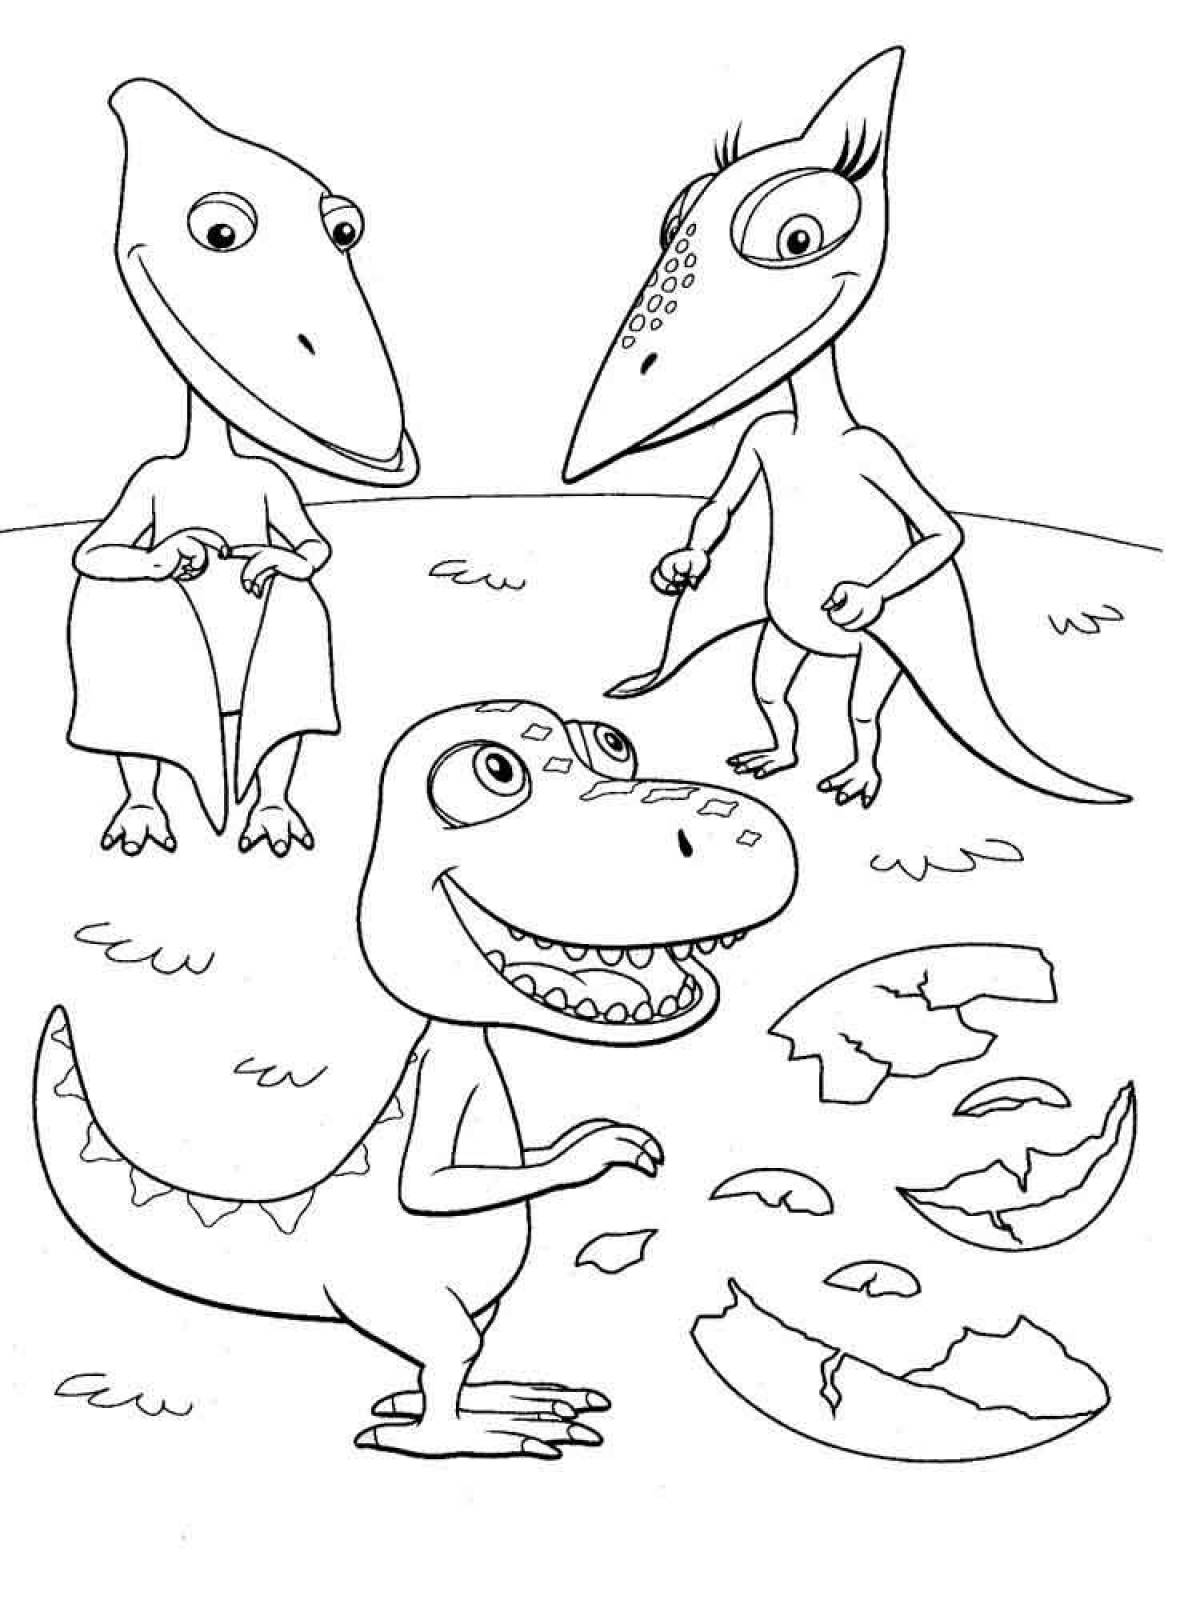 Gorgeous Turbosaurus coloring page